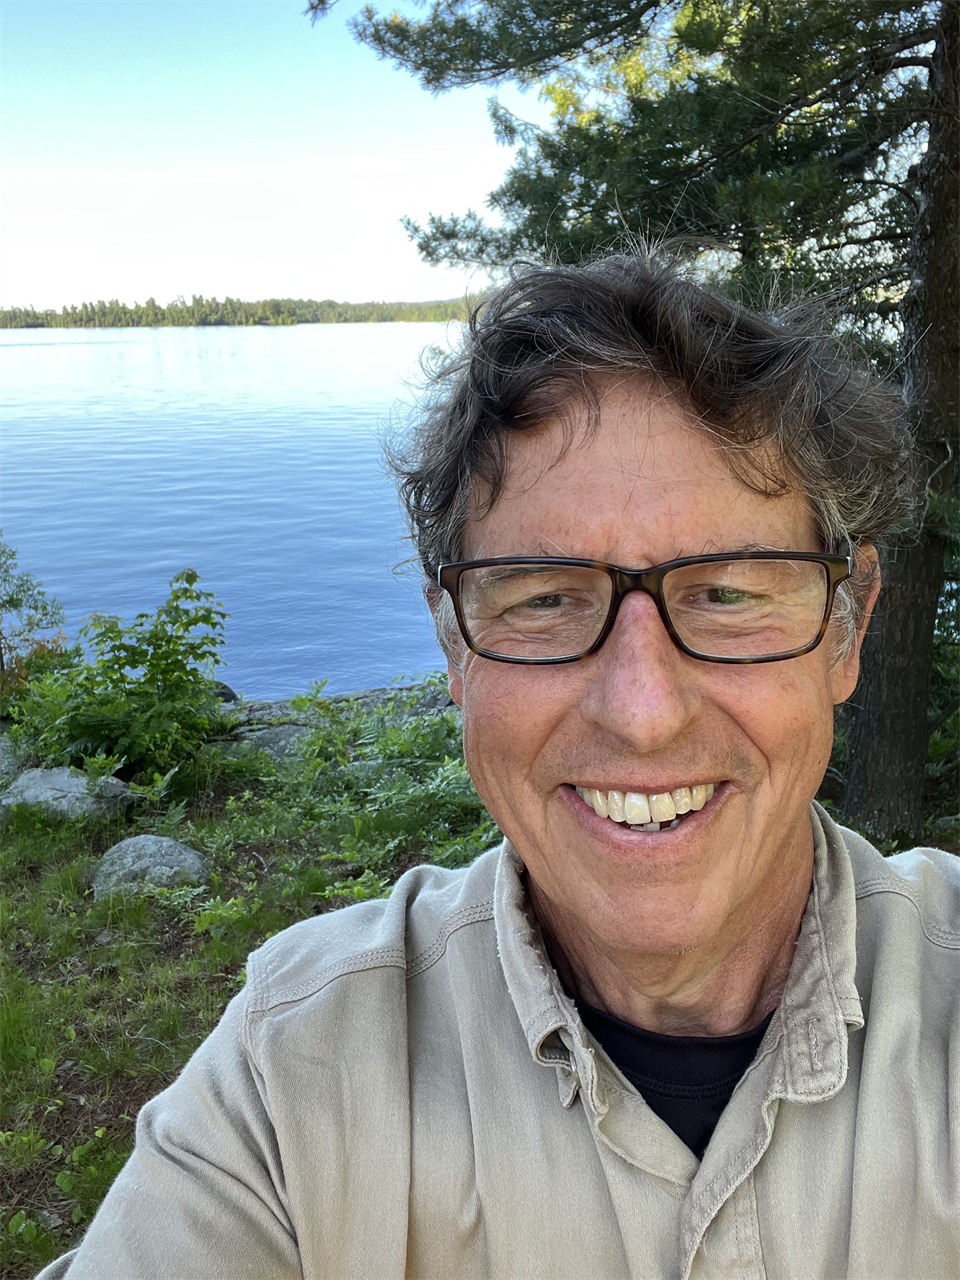 Middle-aged caucasian presenting man wearing glasses smiling standing outdoors in front of a lake with conifer tree and grass in the background.